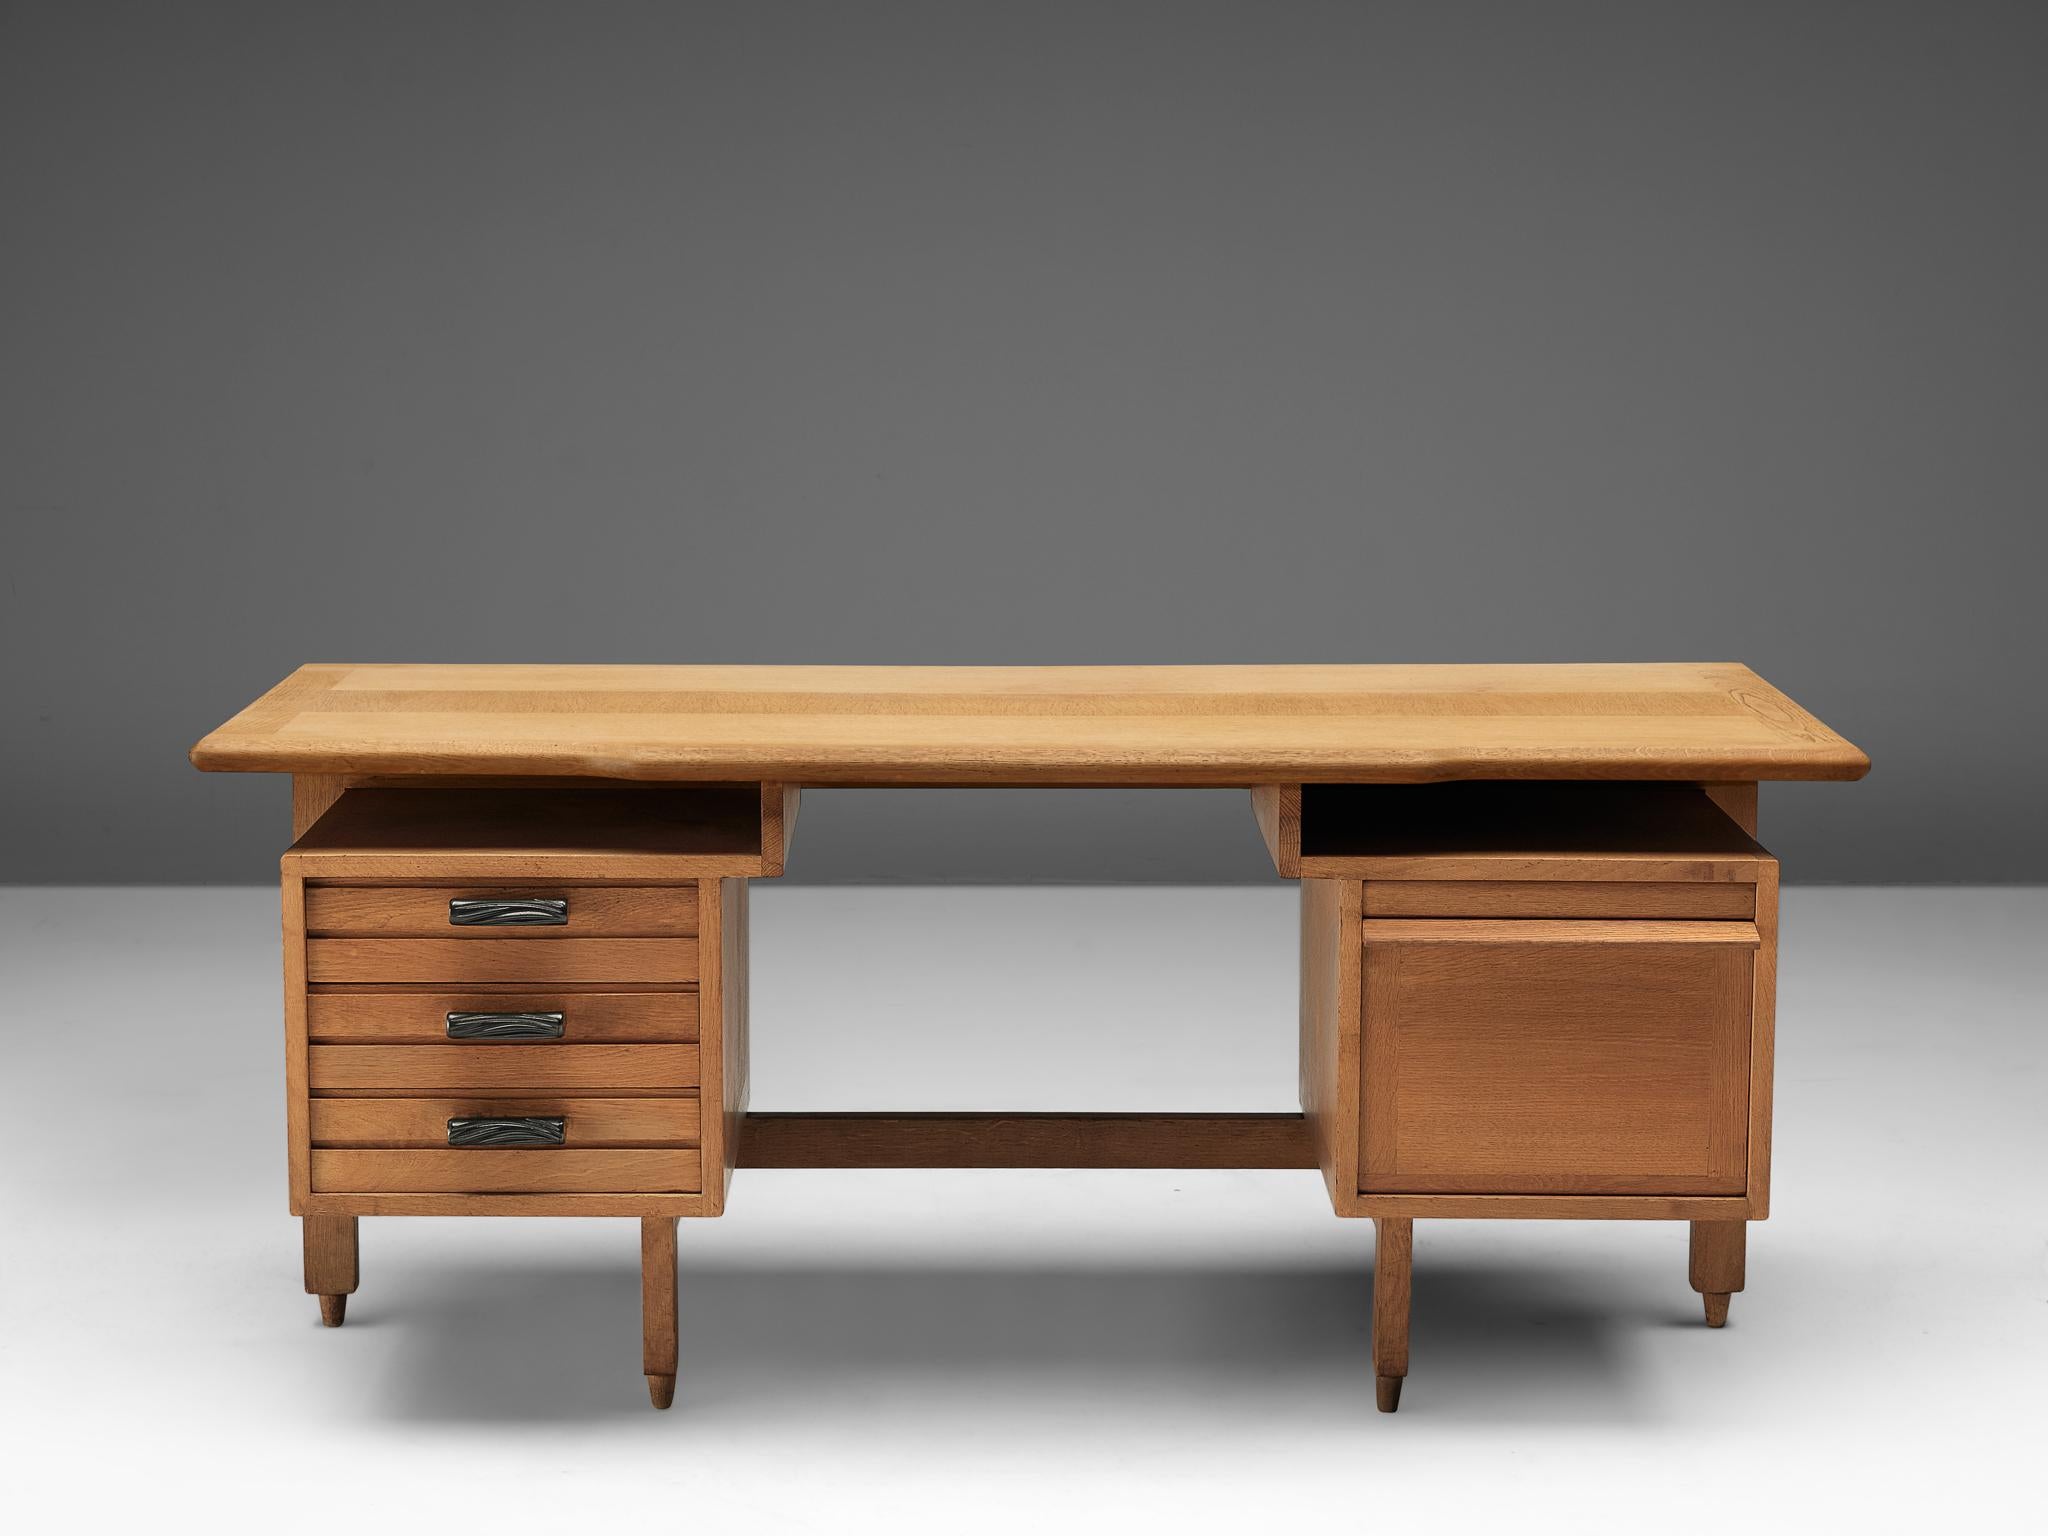 Guillerme et Chambron, desk, oak, France, 1950s.

This desk has a large work surface and are equipped with plenty of storage space due well decorated drawers with ceramic handles on the left and one large compartment on the right to fully enjoy the